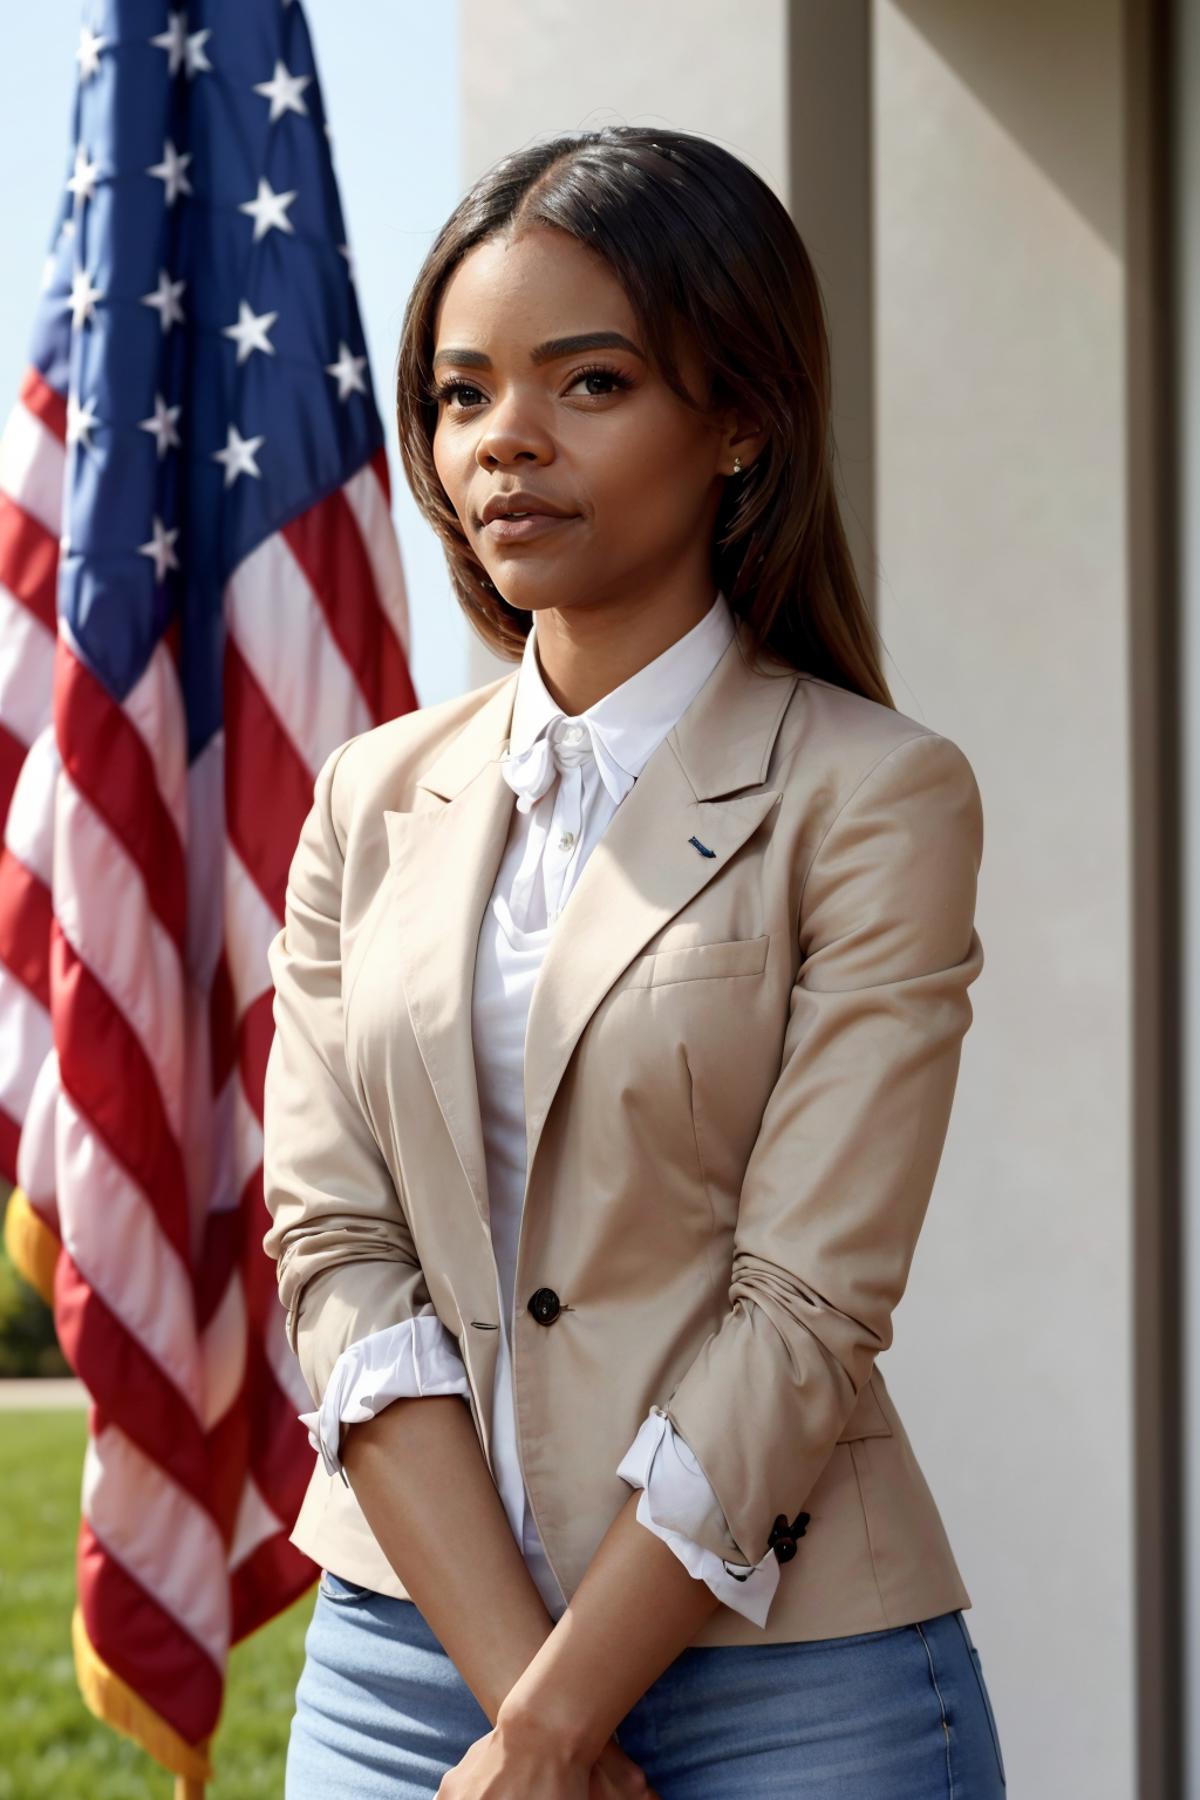 Candace Owens - American politics image by Ggrue